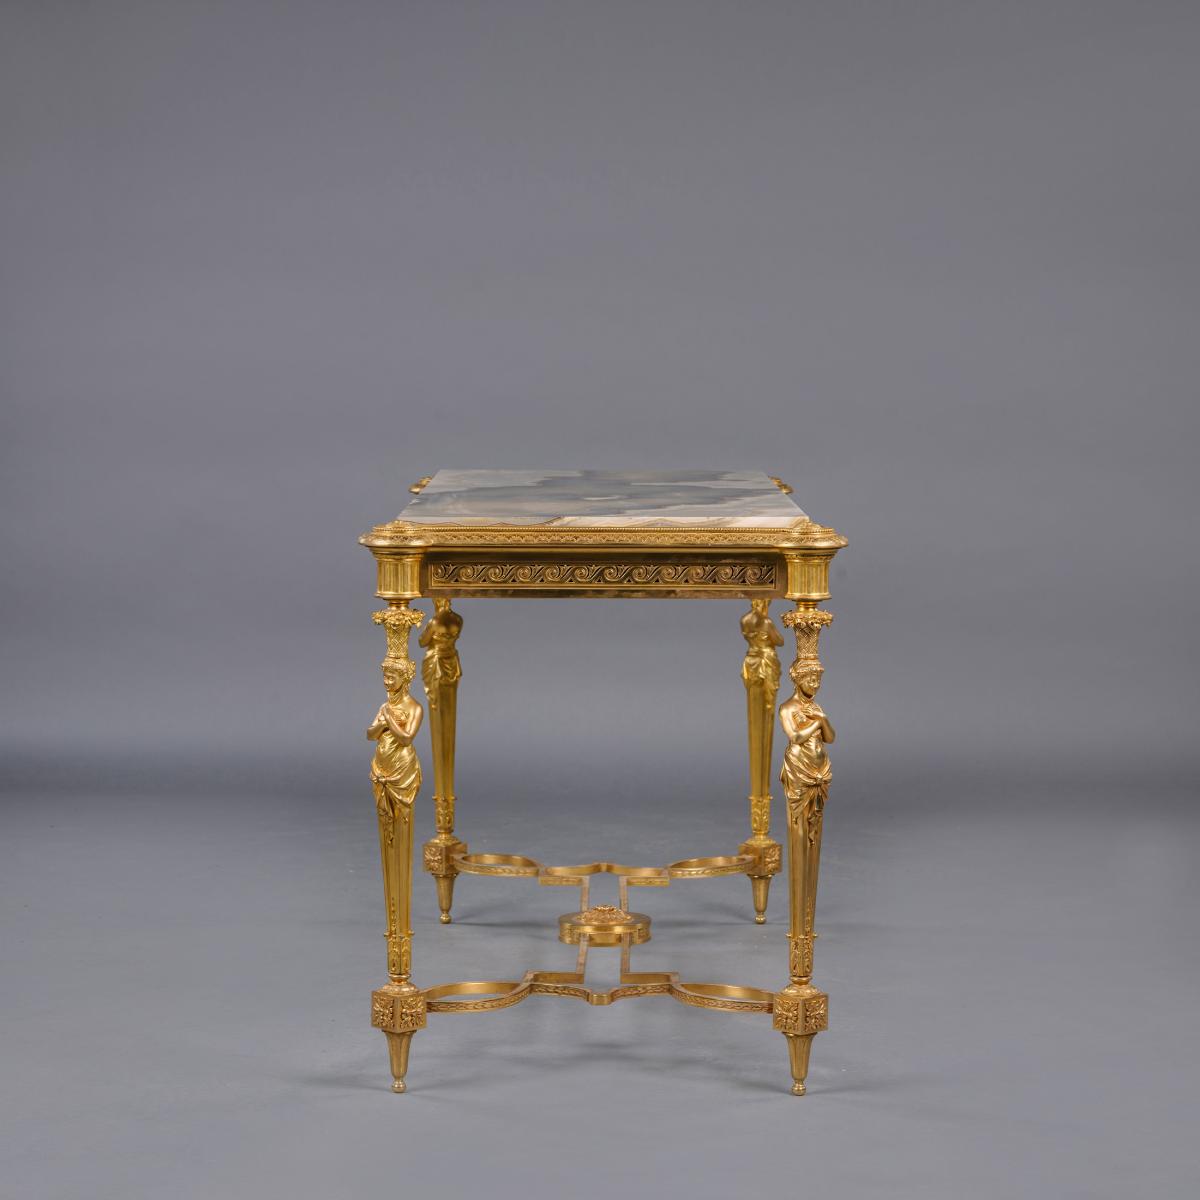 A Napoleon III Gilt-Bronze and Onyx Centre Table, By Maison Marnyhac, Paris. 